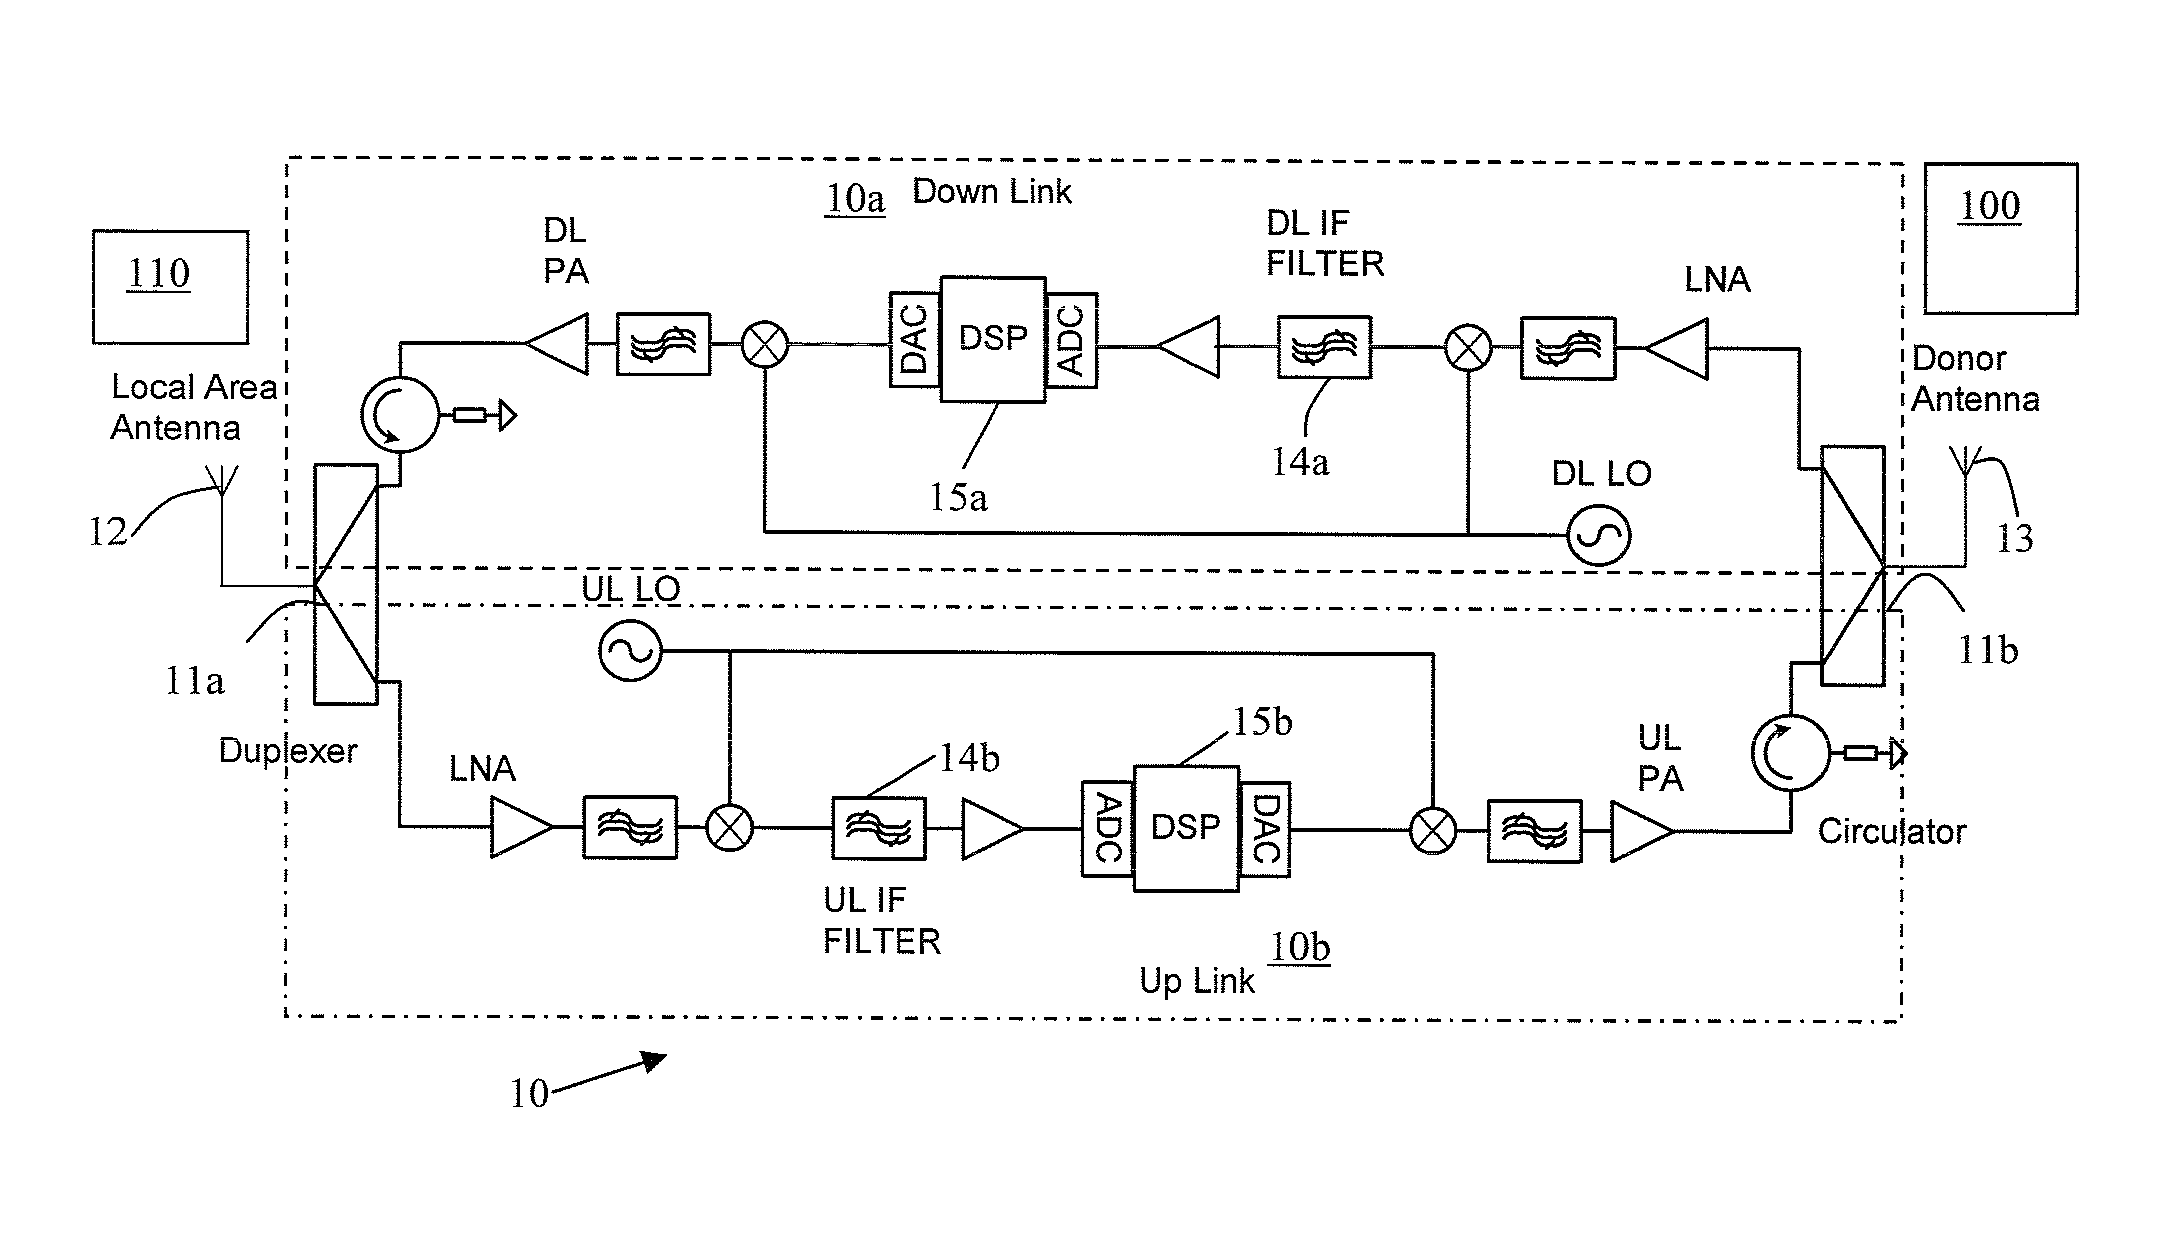 Stability recovery for an on-frequency RF repeater with adaptive echo cancellation